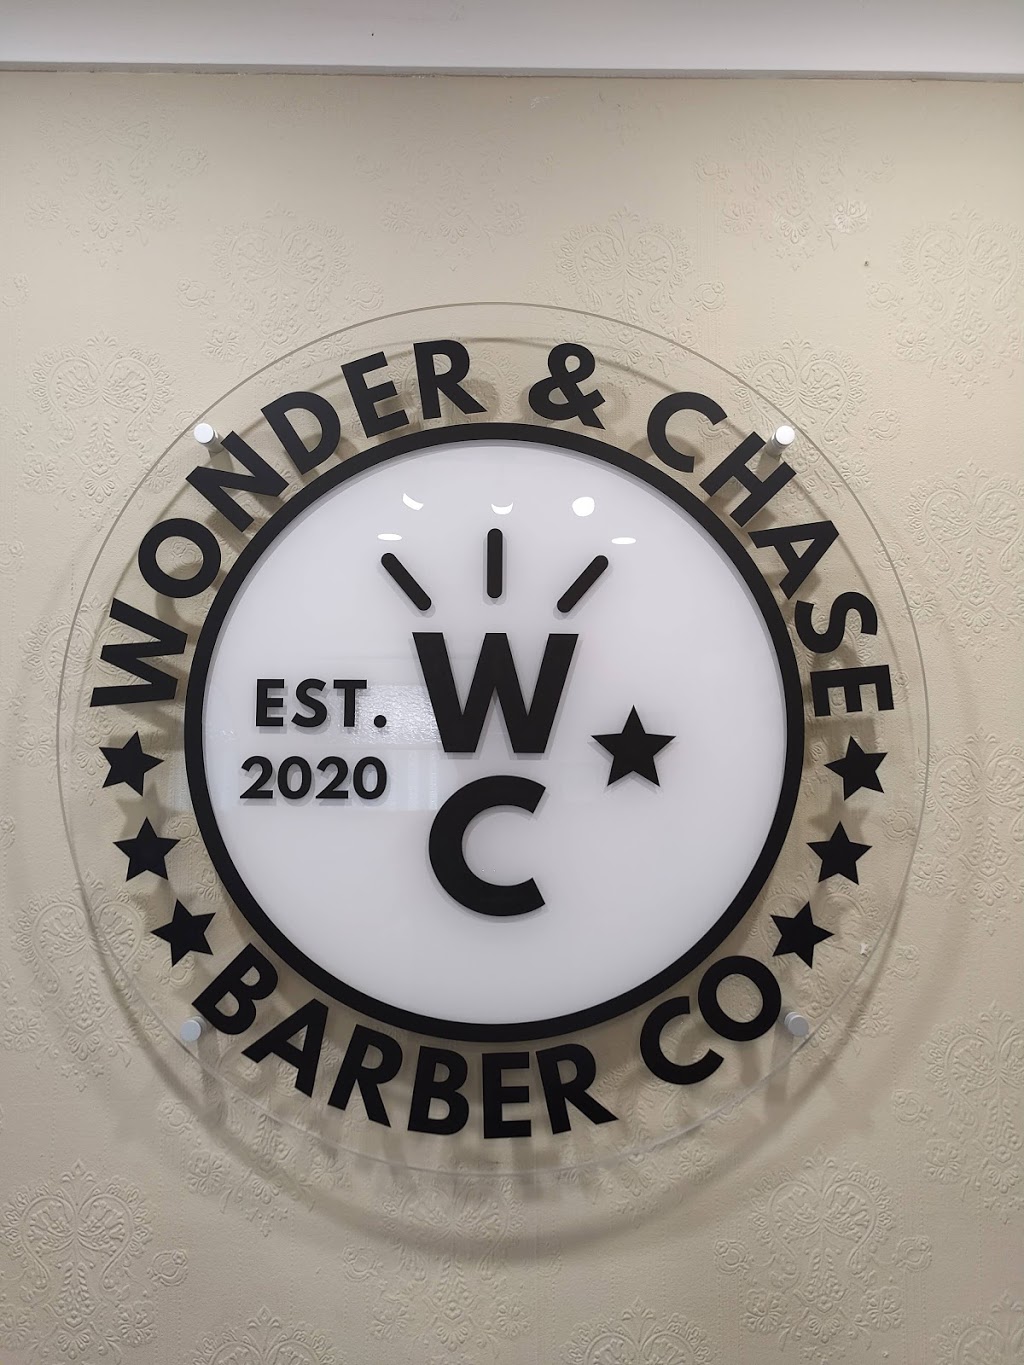 Wonder & Chase Barber Co. | hair care | 214 Colburn Ave, Victoria Point QLD 4165, Australia